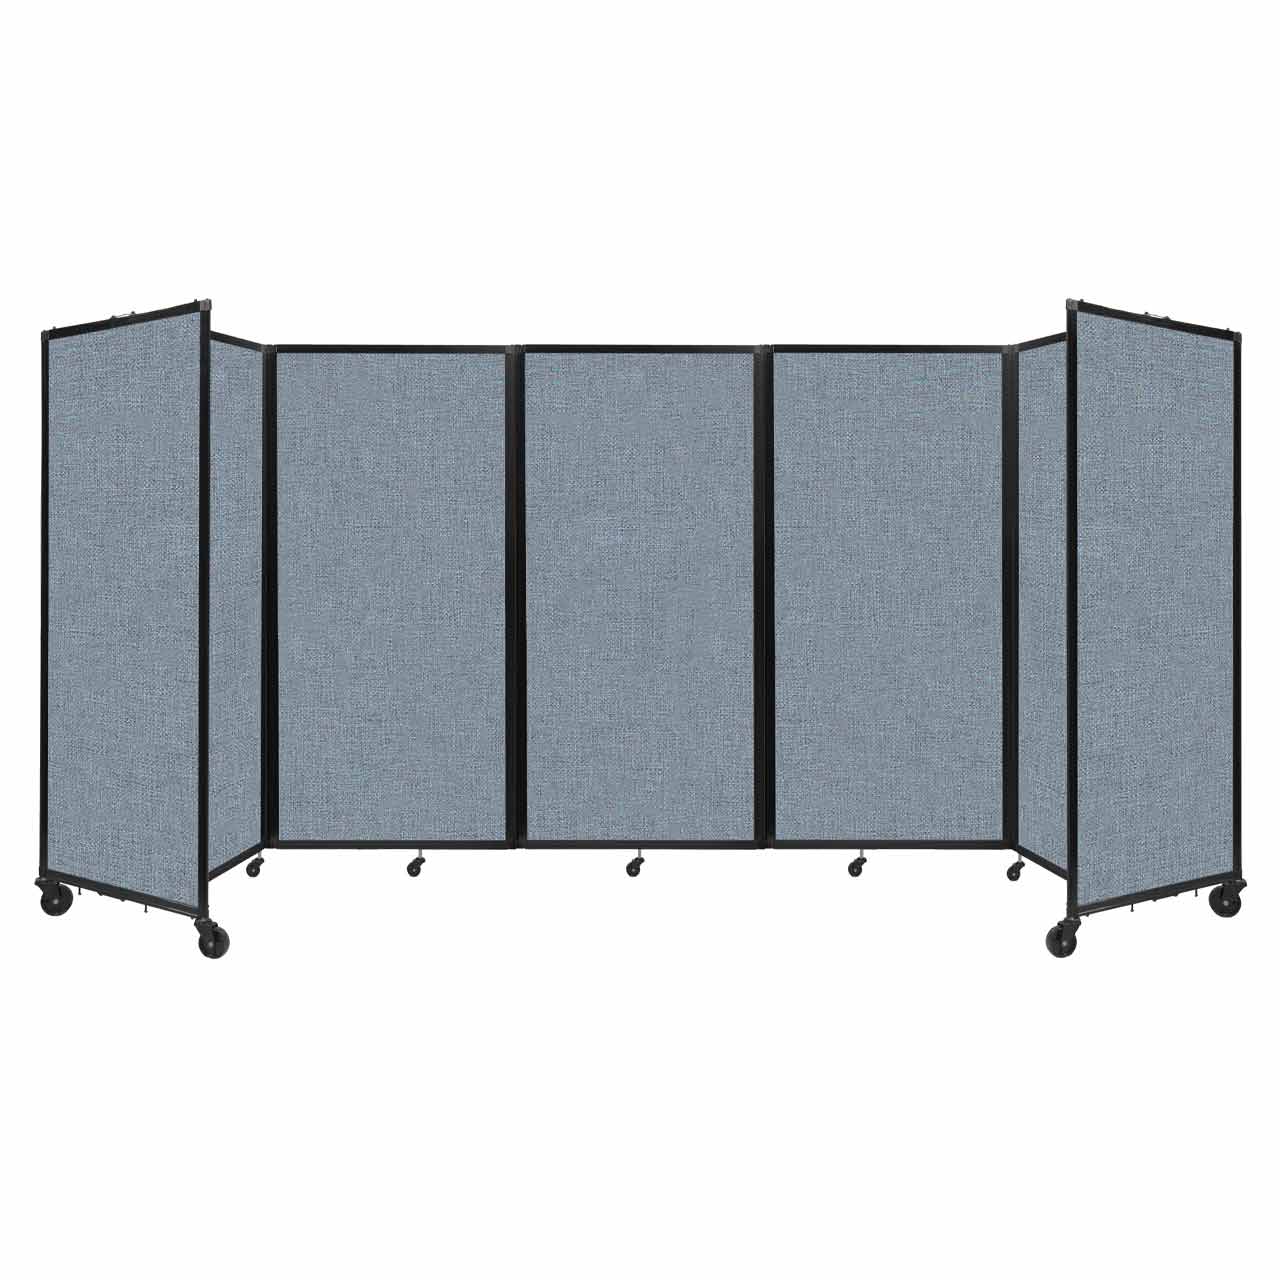 Room Divider 360° Folding Portable Partition with Acoustical Fabric Panels, 14' W x 6' H